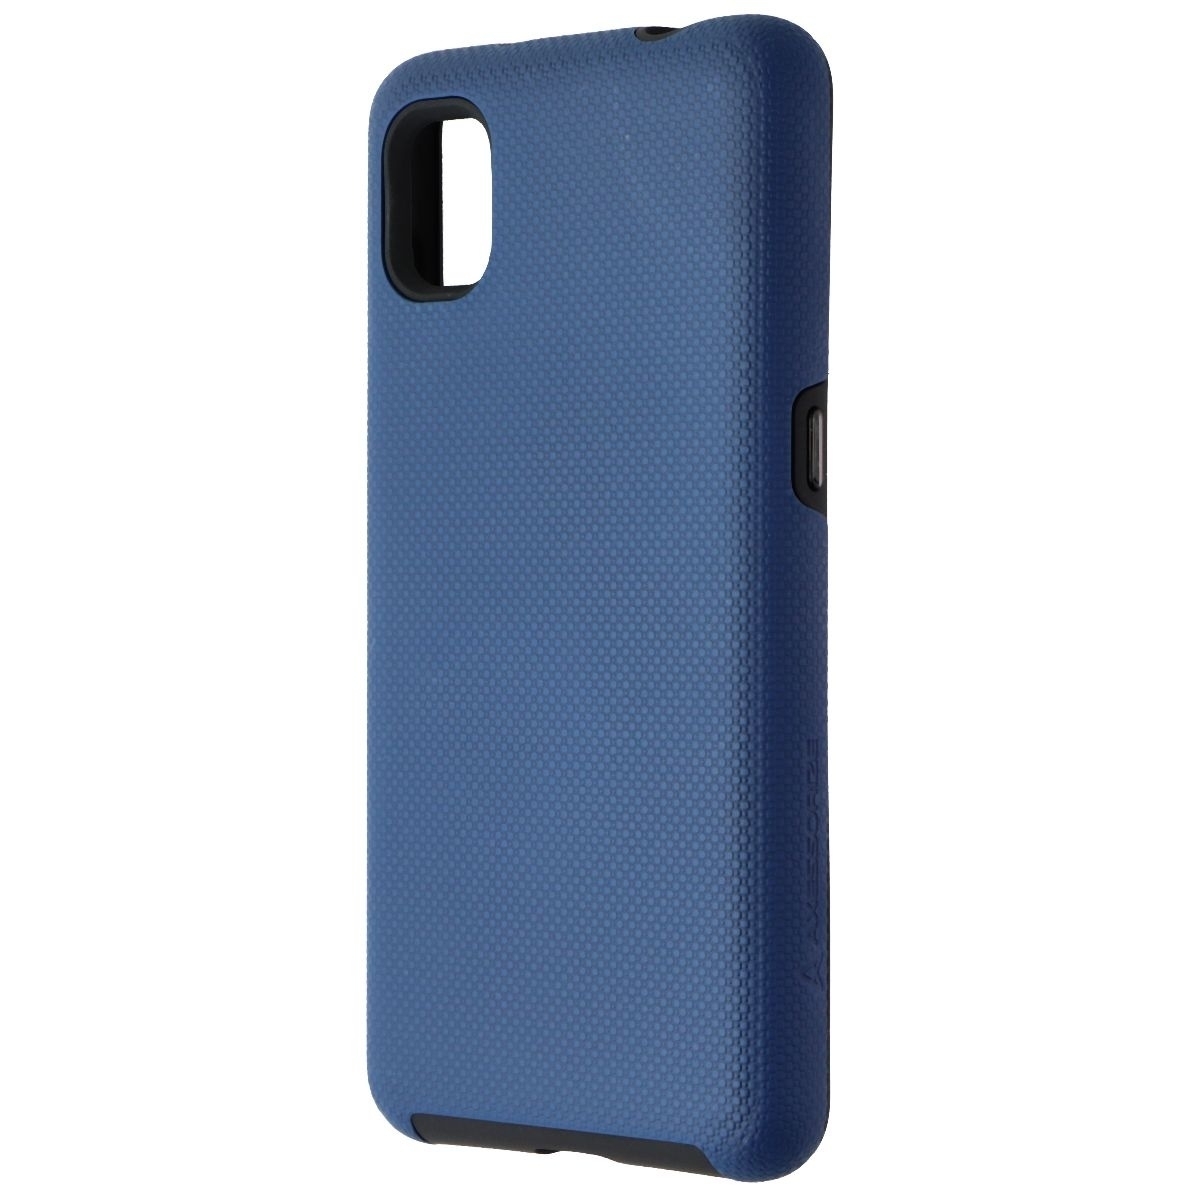 Axessorize PROTech Series Case For TCL A30 - Cobalt Blue